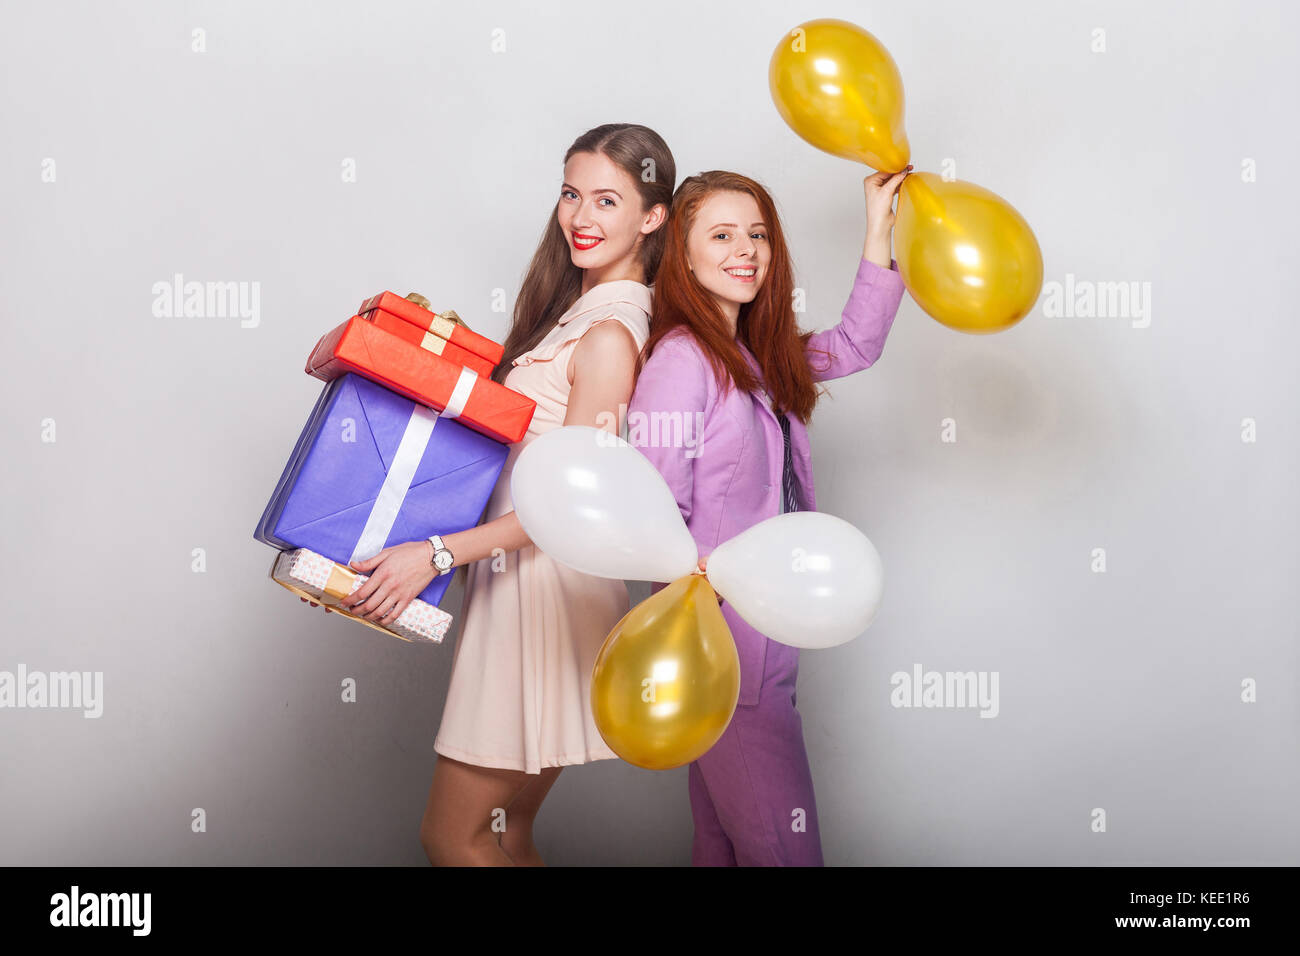 Beautiful girls standing back to back, holding many box and air balloon, toothy smiling and looking at camera. Studio shot, gray background Stock Photo